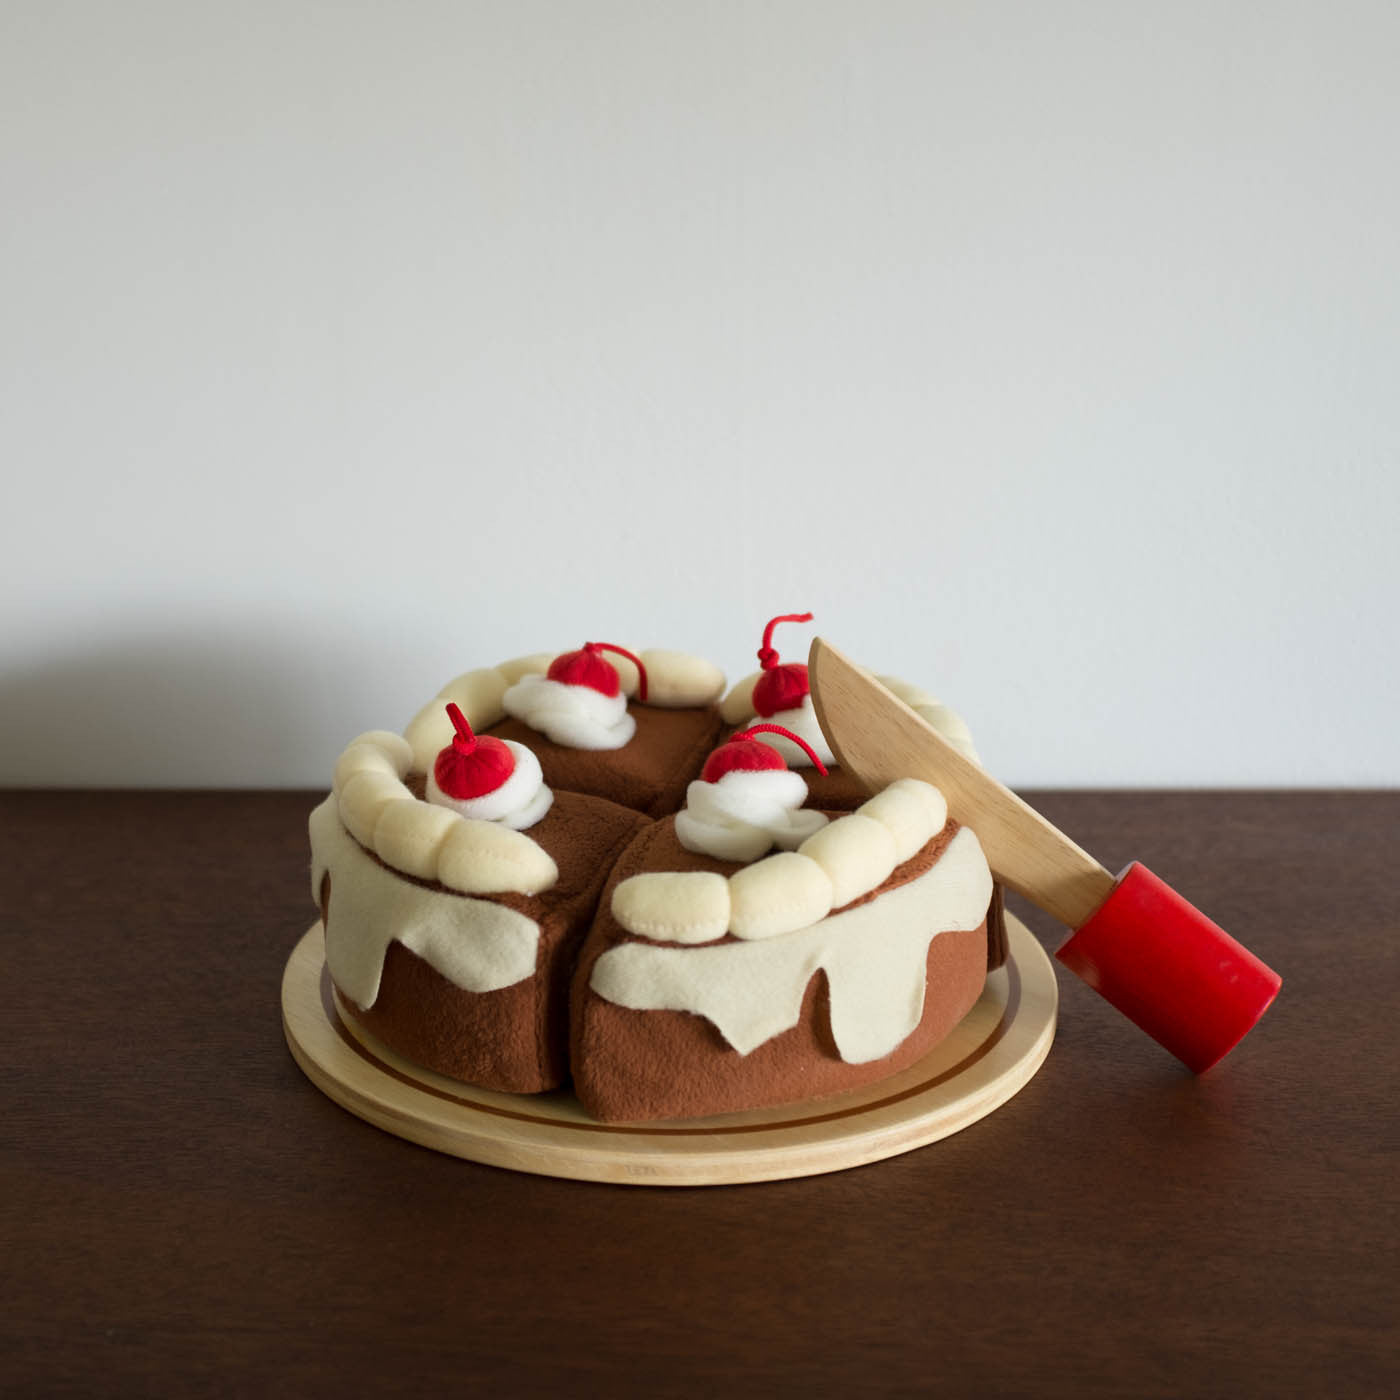 Plush Cake with Wooden Knife